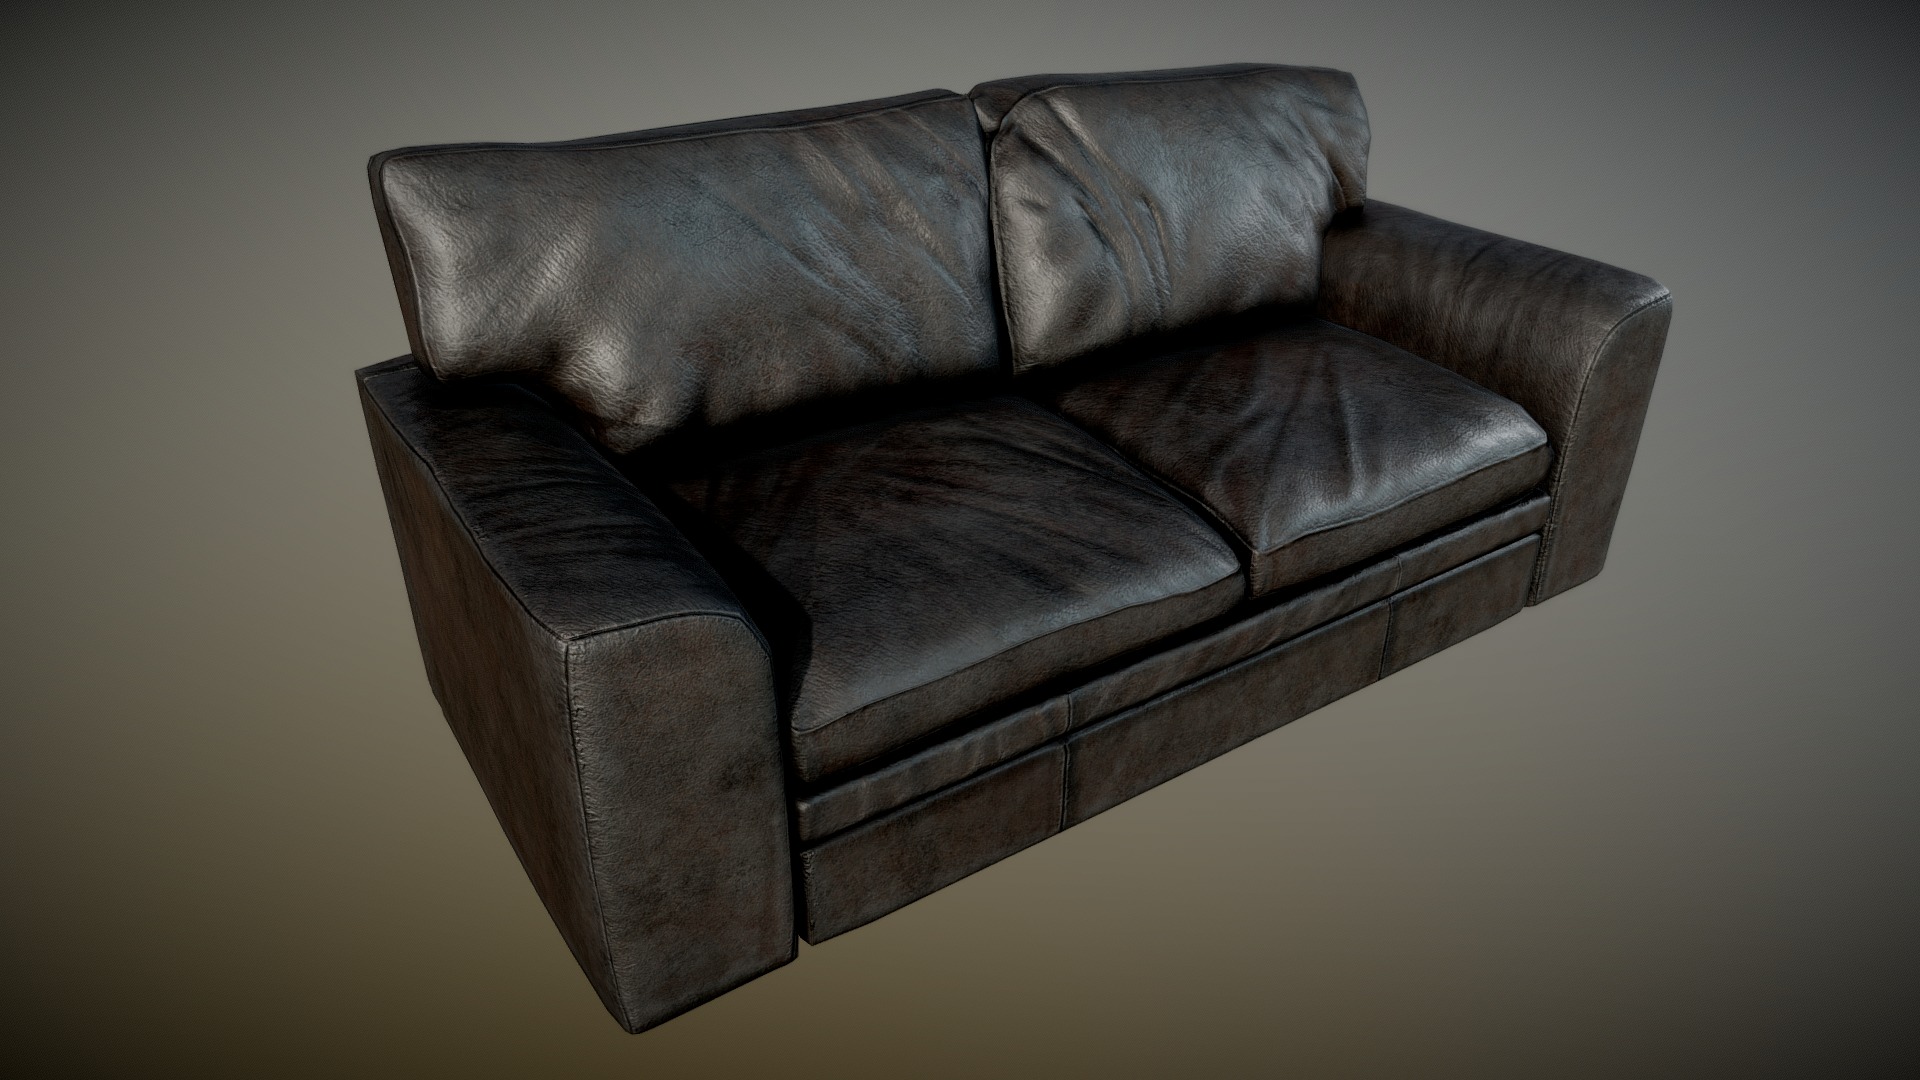 3D model Old Dirty Leather Couch Black – PBR - This is a 3D model of the Old Dirty Leather Couch Black - PBR. The 3D model is about a brown leather couch.